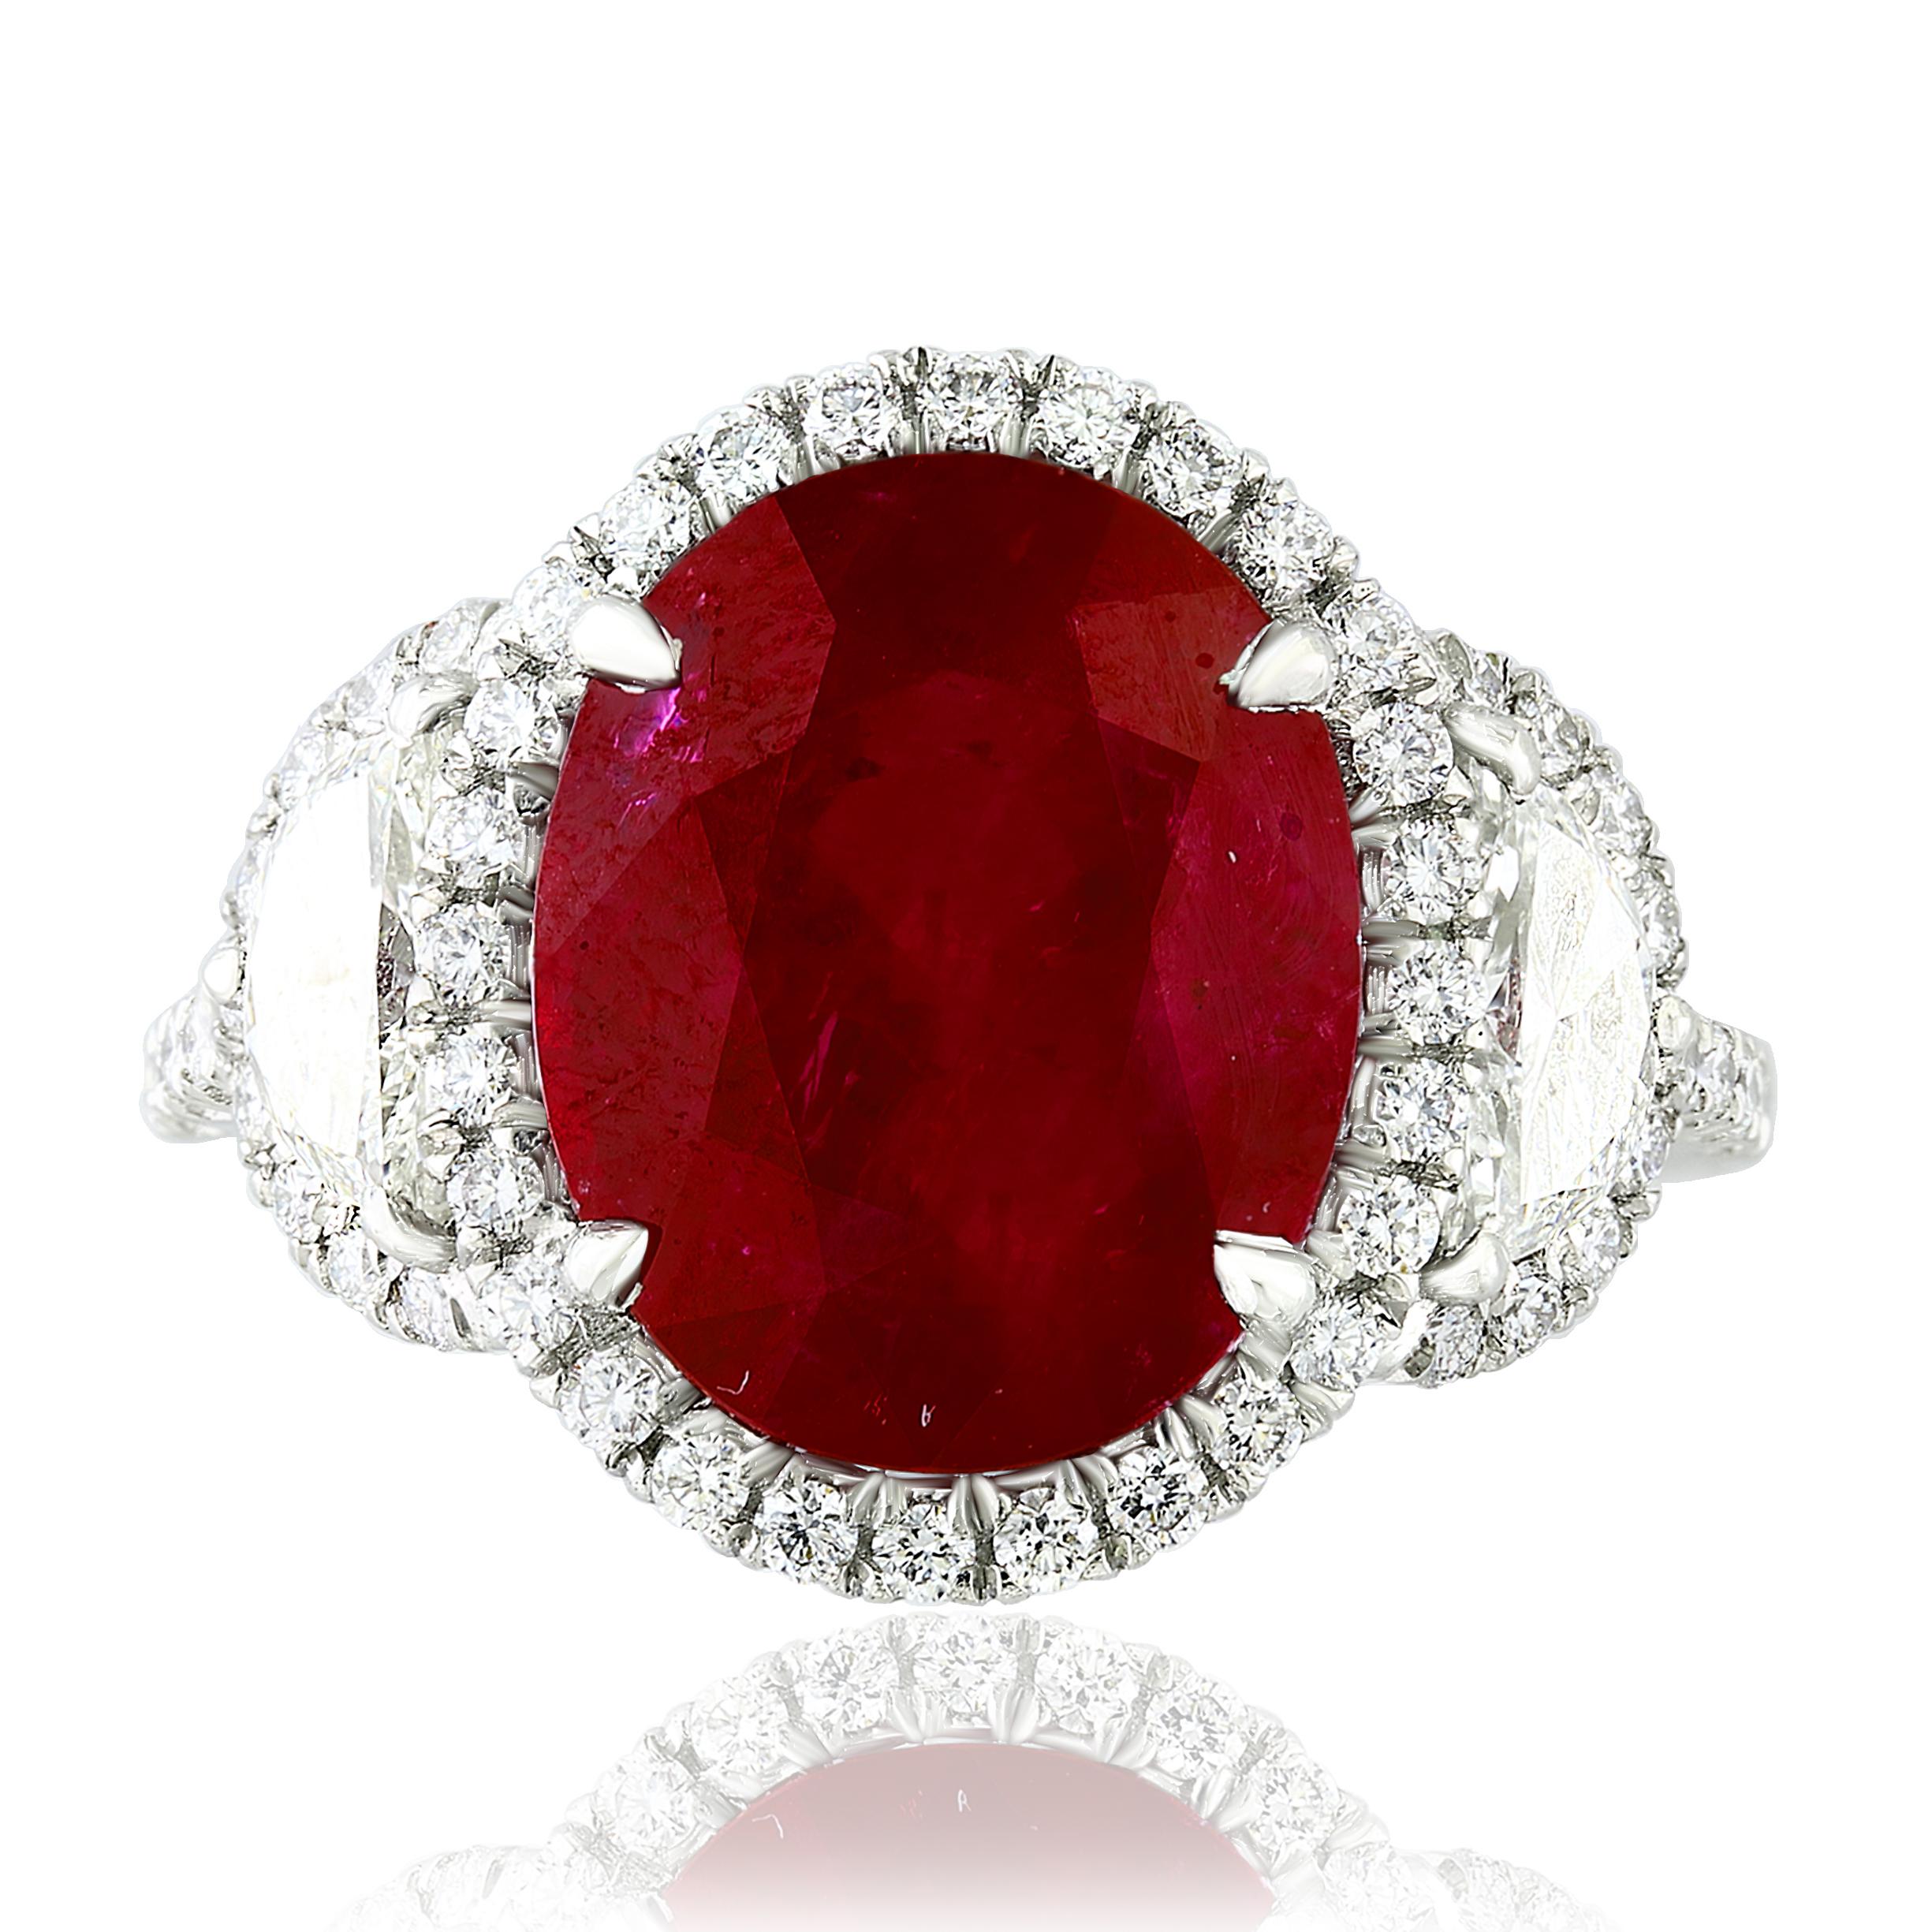 A stunning ring showcasing a rich intense red Oval cut Certified Ruby weighing 6.05 carats surrounded by a row of diamonds. Flanking the center stone are two brilliant cut half-moon diamonds, weighing 0.59 carats total, framed in a brilliant diamond